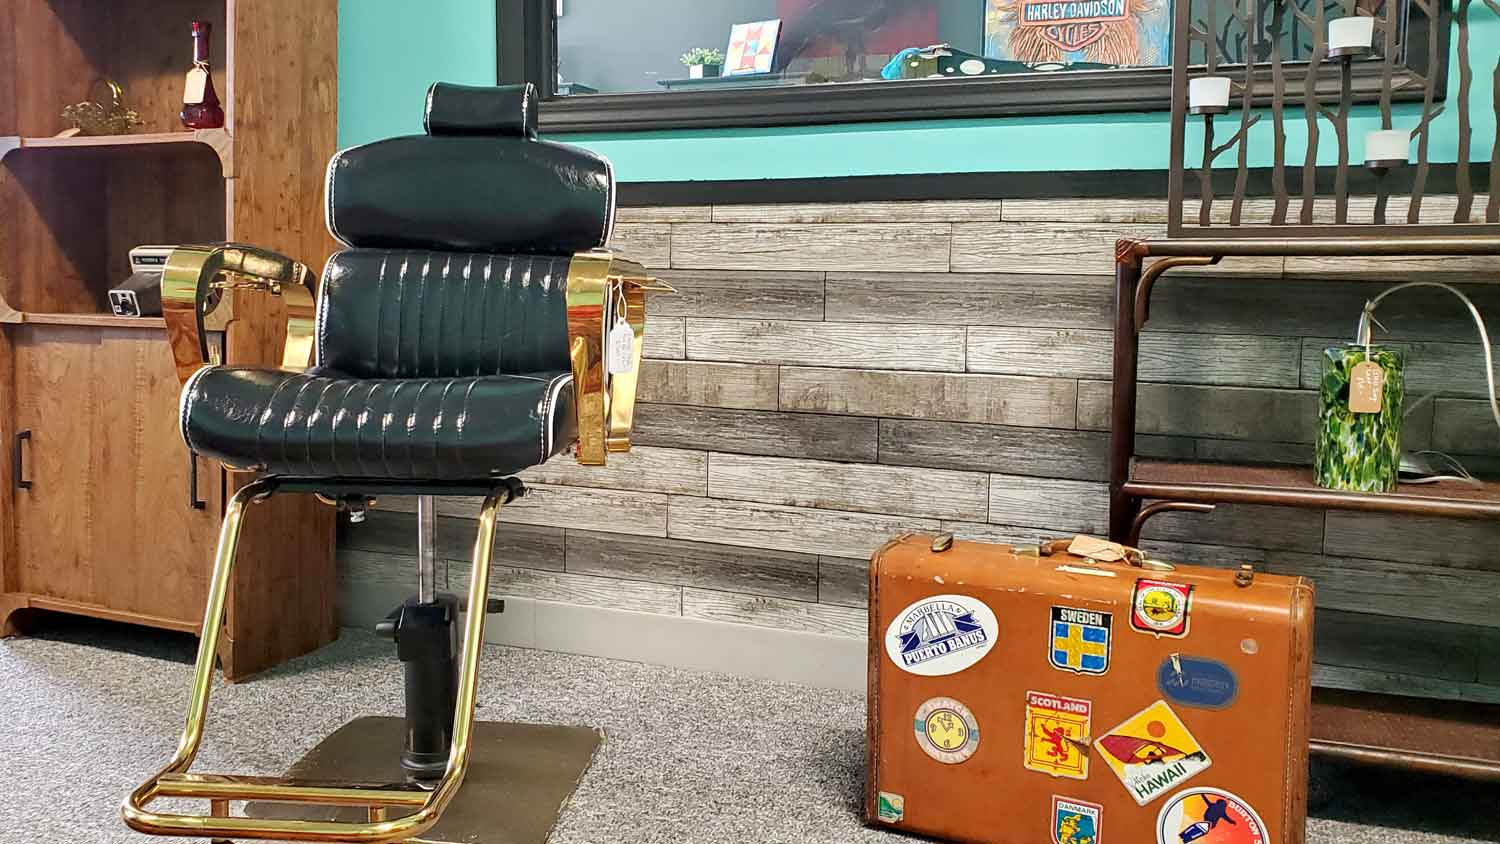 Vintage beauty chair, suitcase, collectibles, and decor.